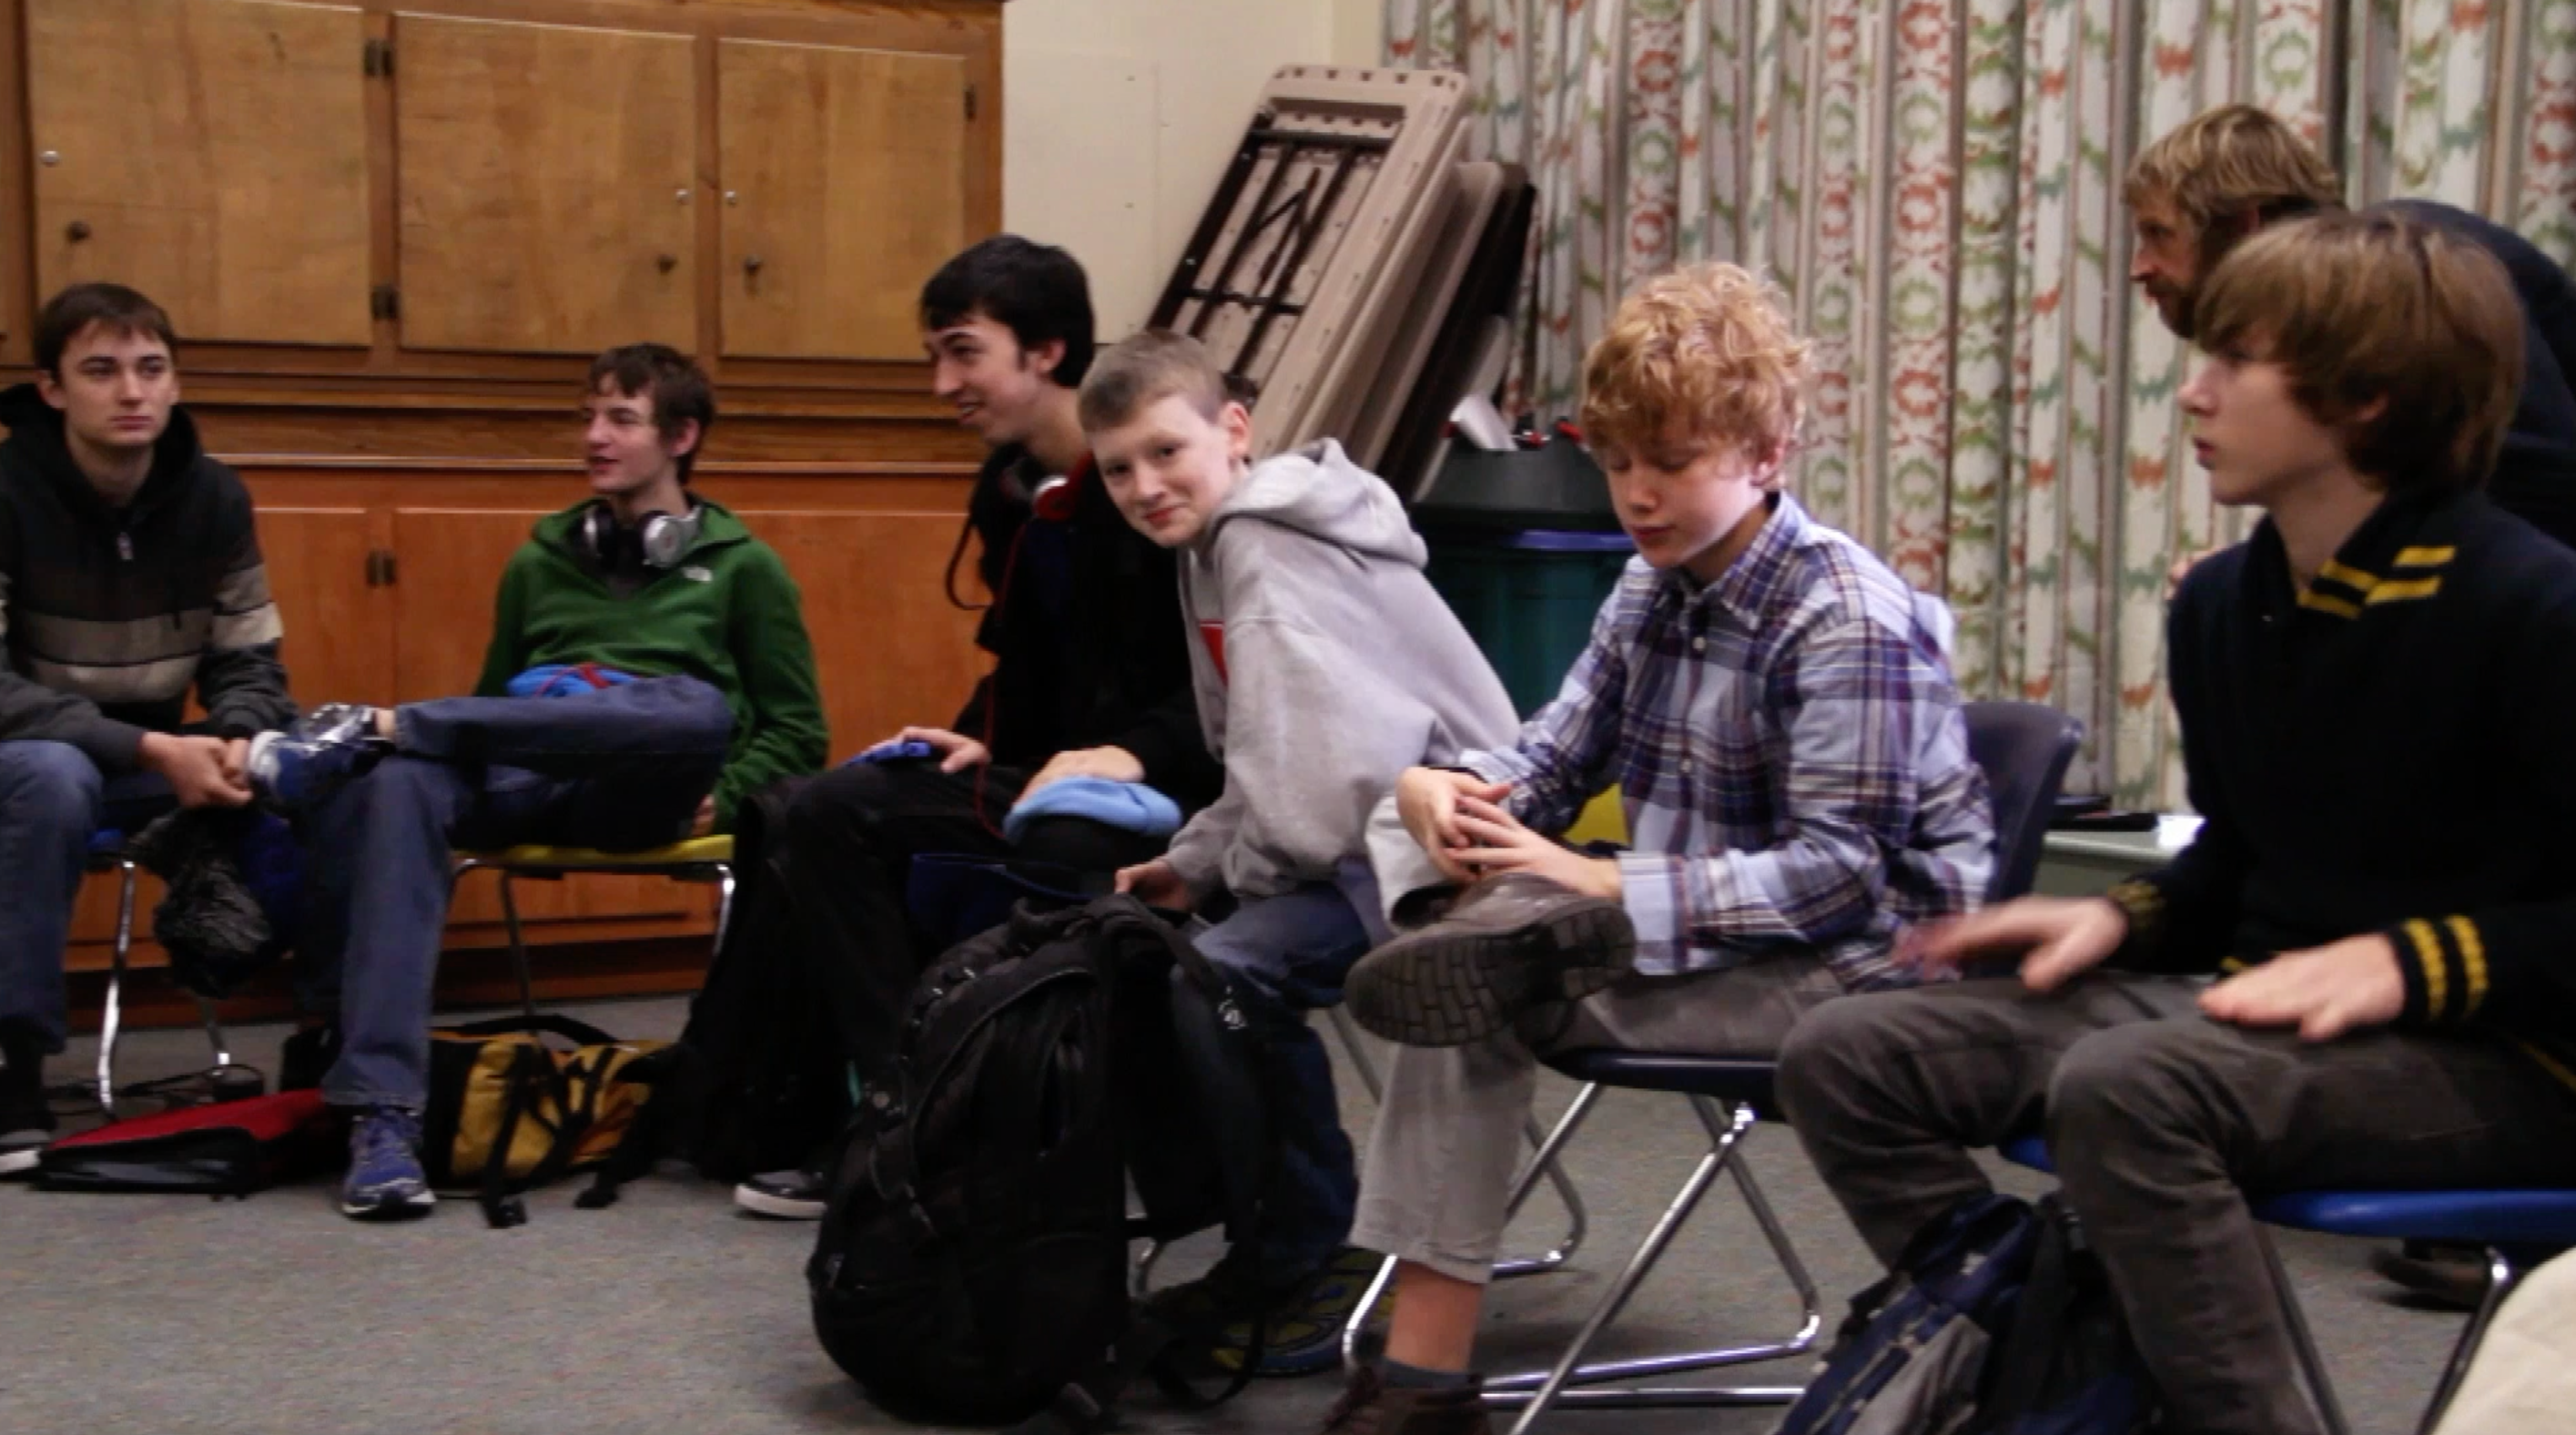 A group of boys sit next to each other in a circle.